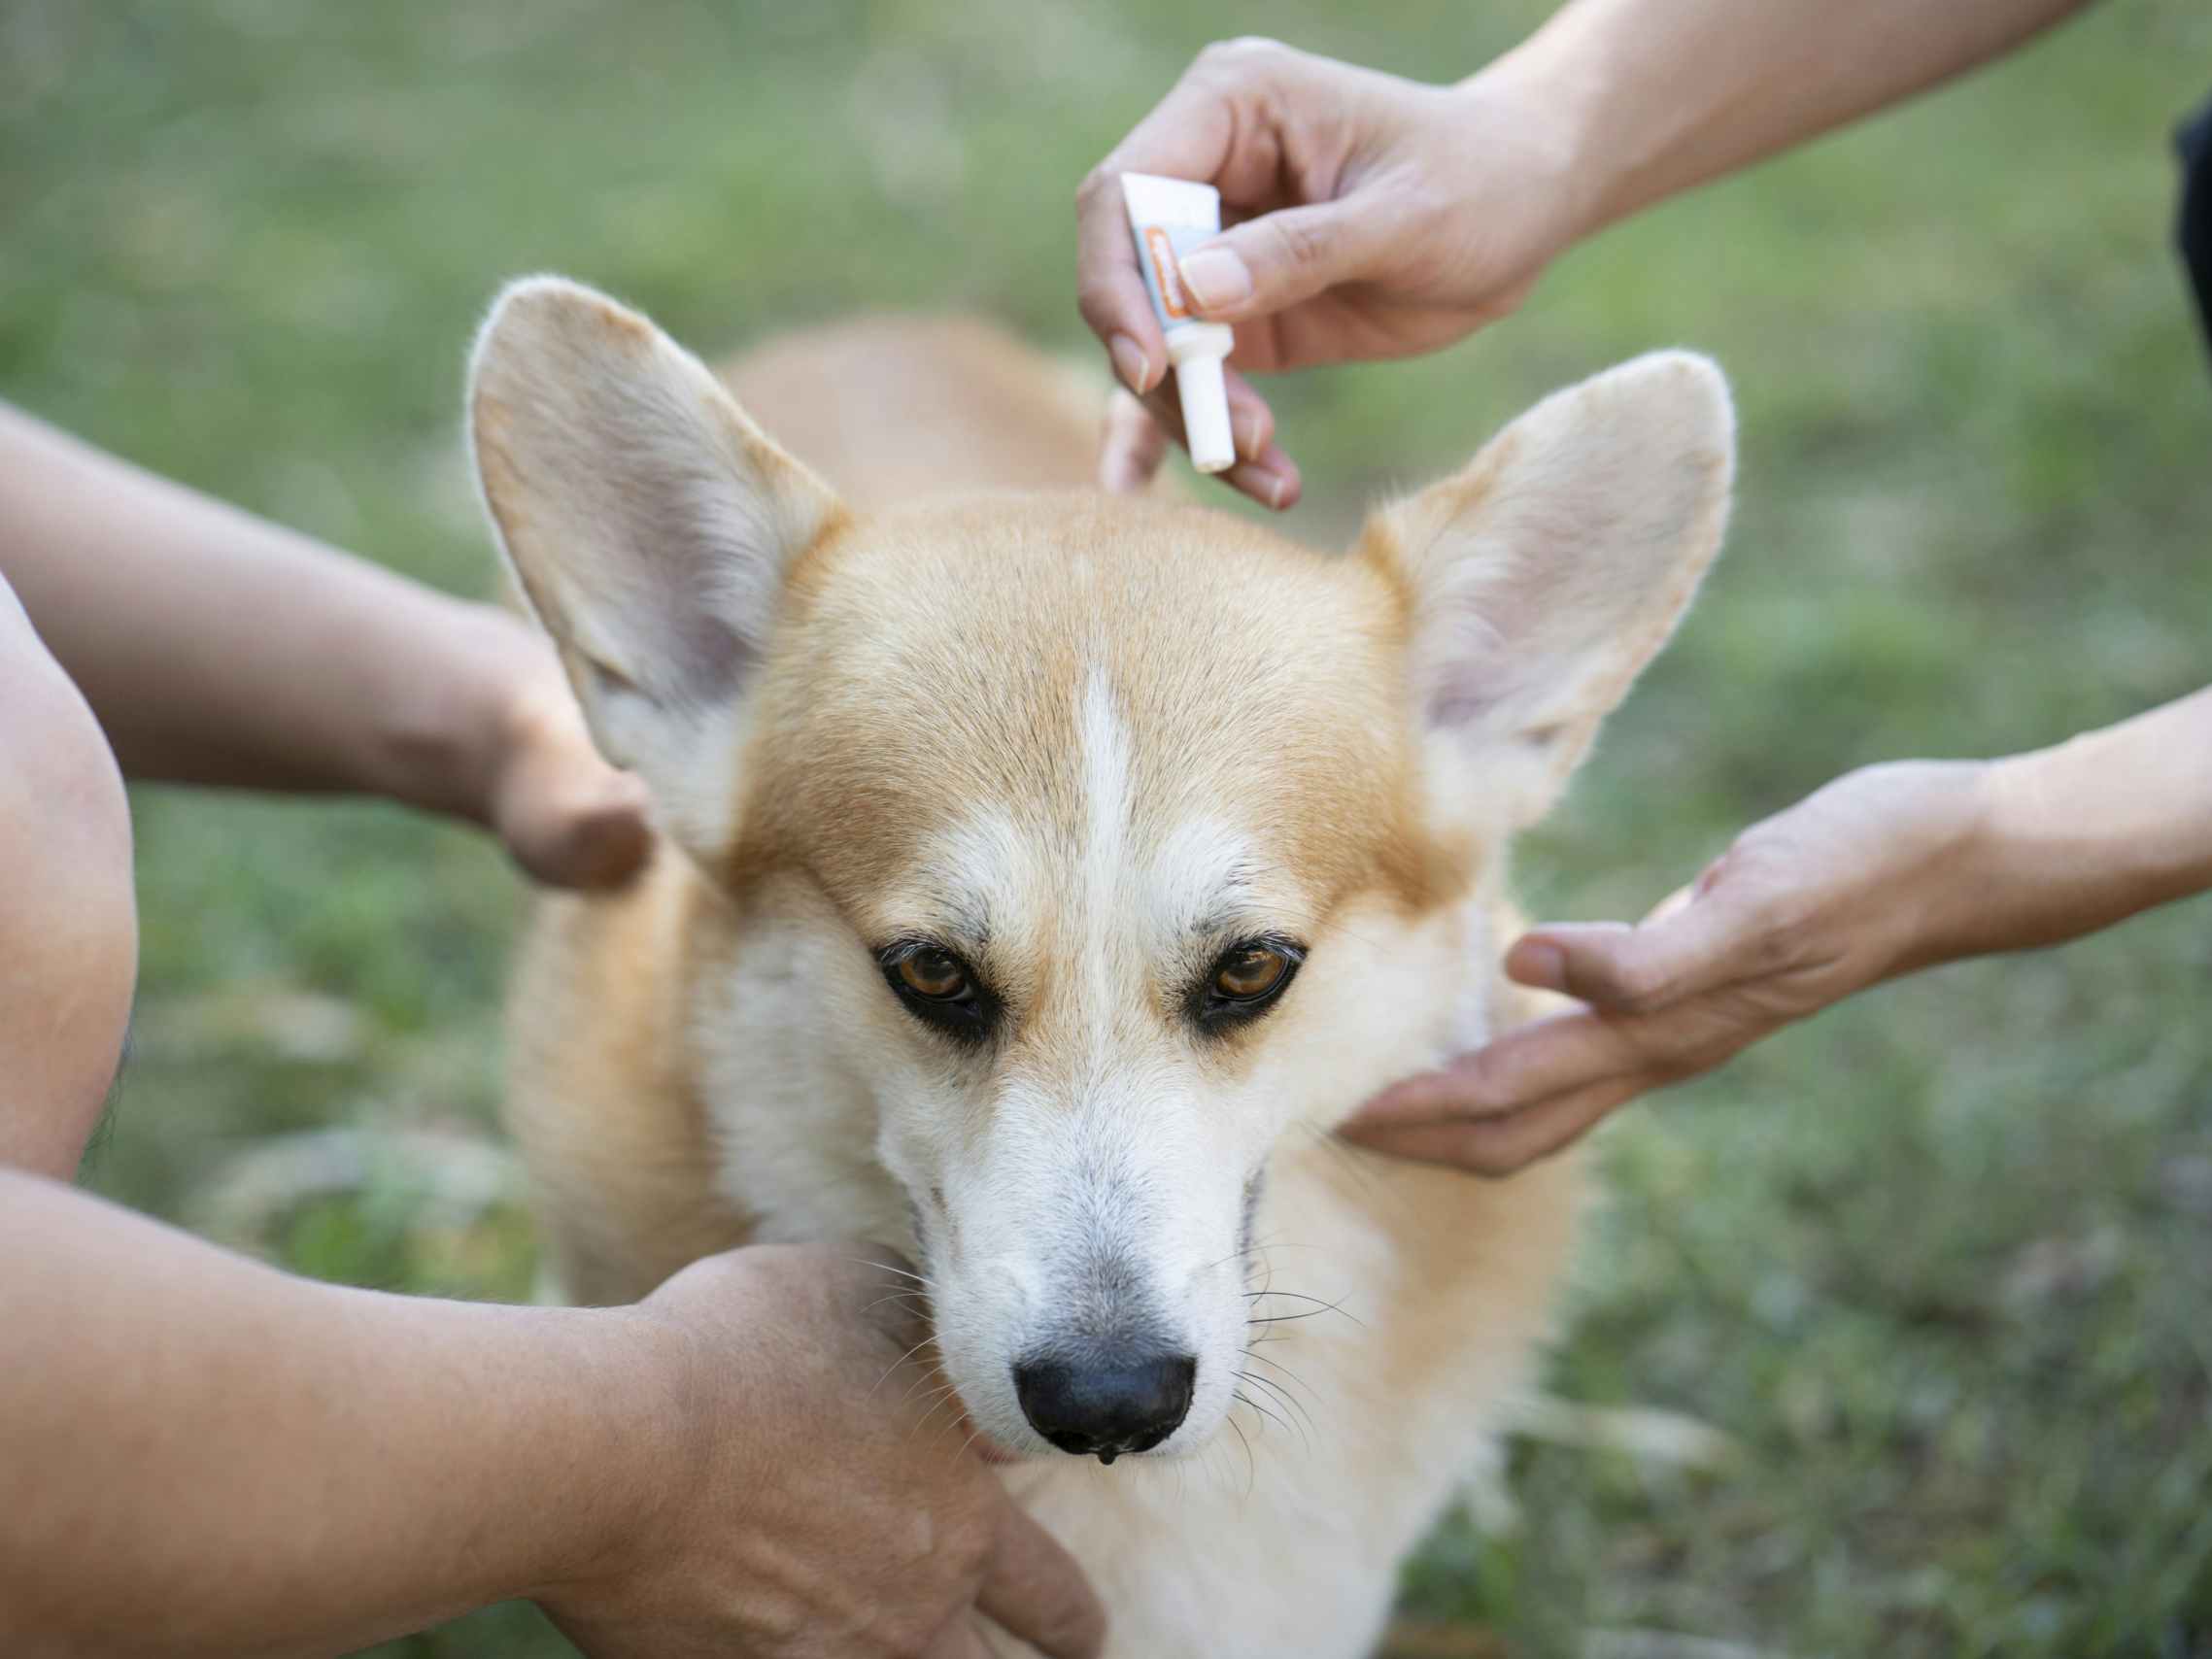 Two people's hands holding a dog still while one person applies flea medicine to the back of the dog's neck.